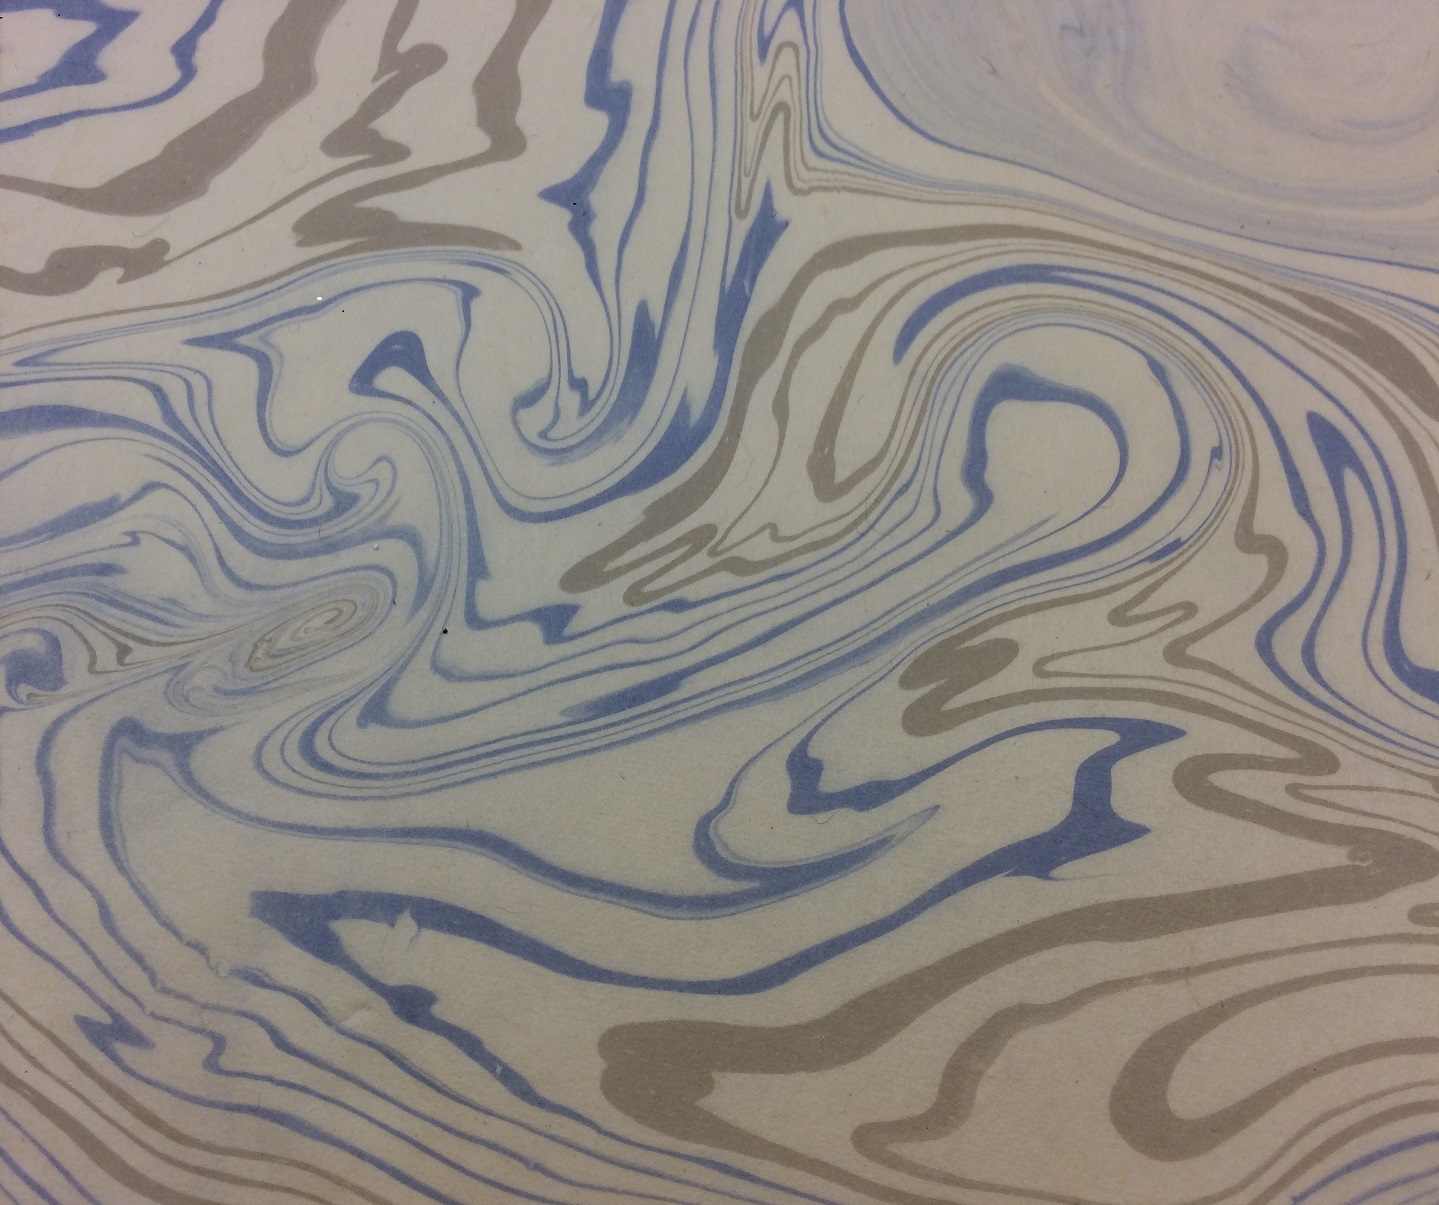 A piece of marbled paper with swirls of blue and grey